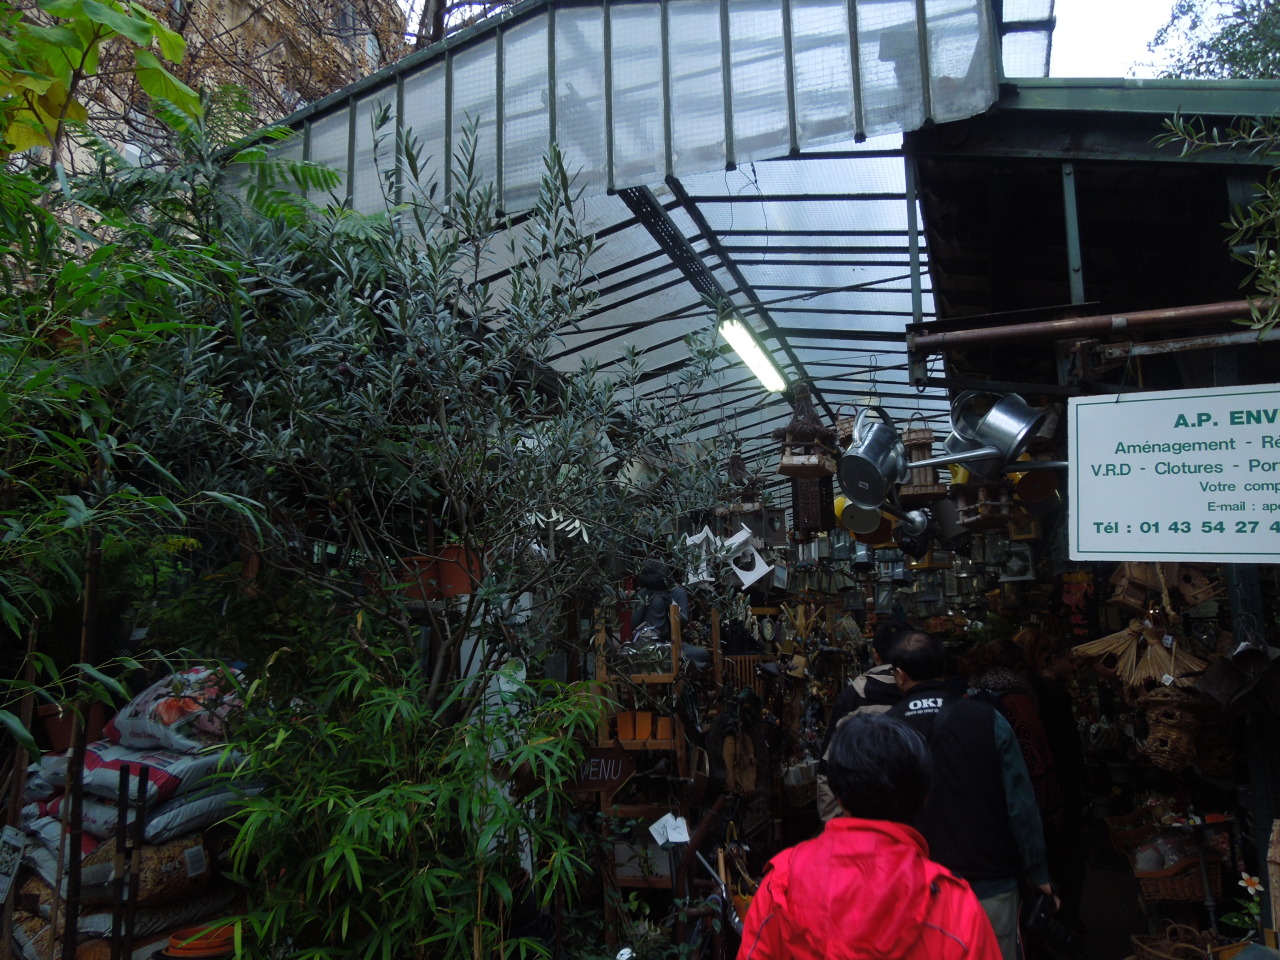 ehsth:  I visited this tiny plant store when I was in Paris. It was so full of plants